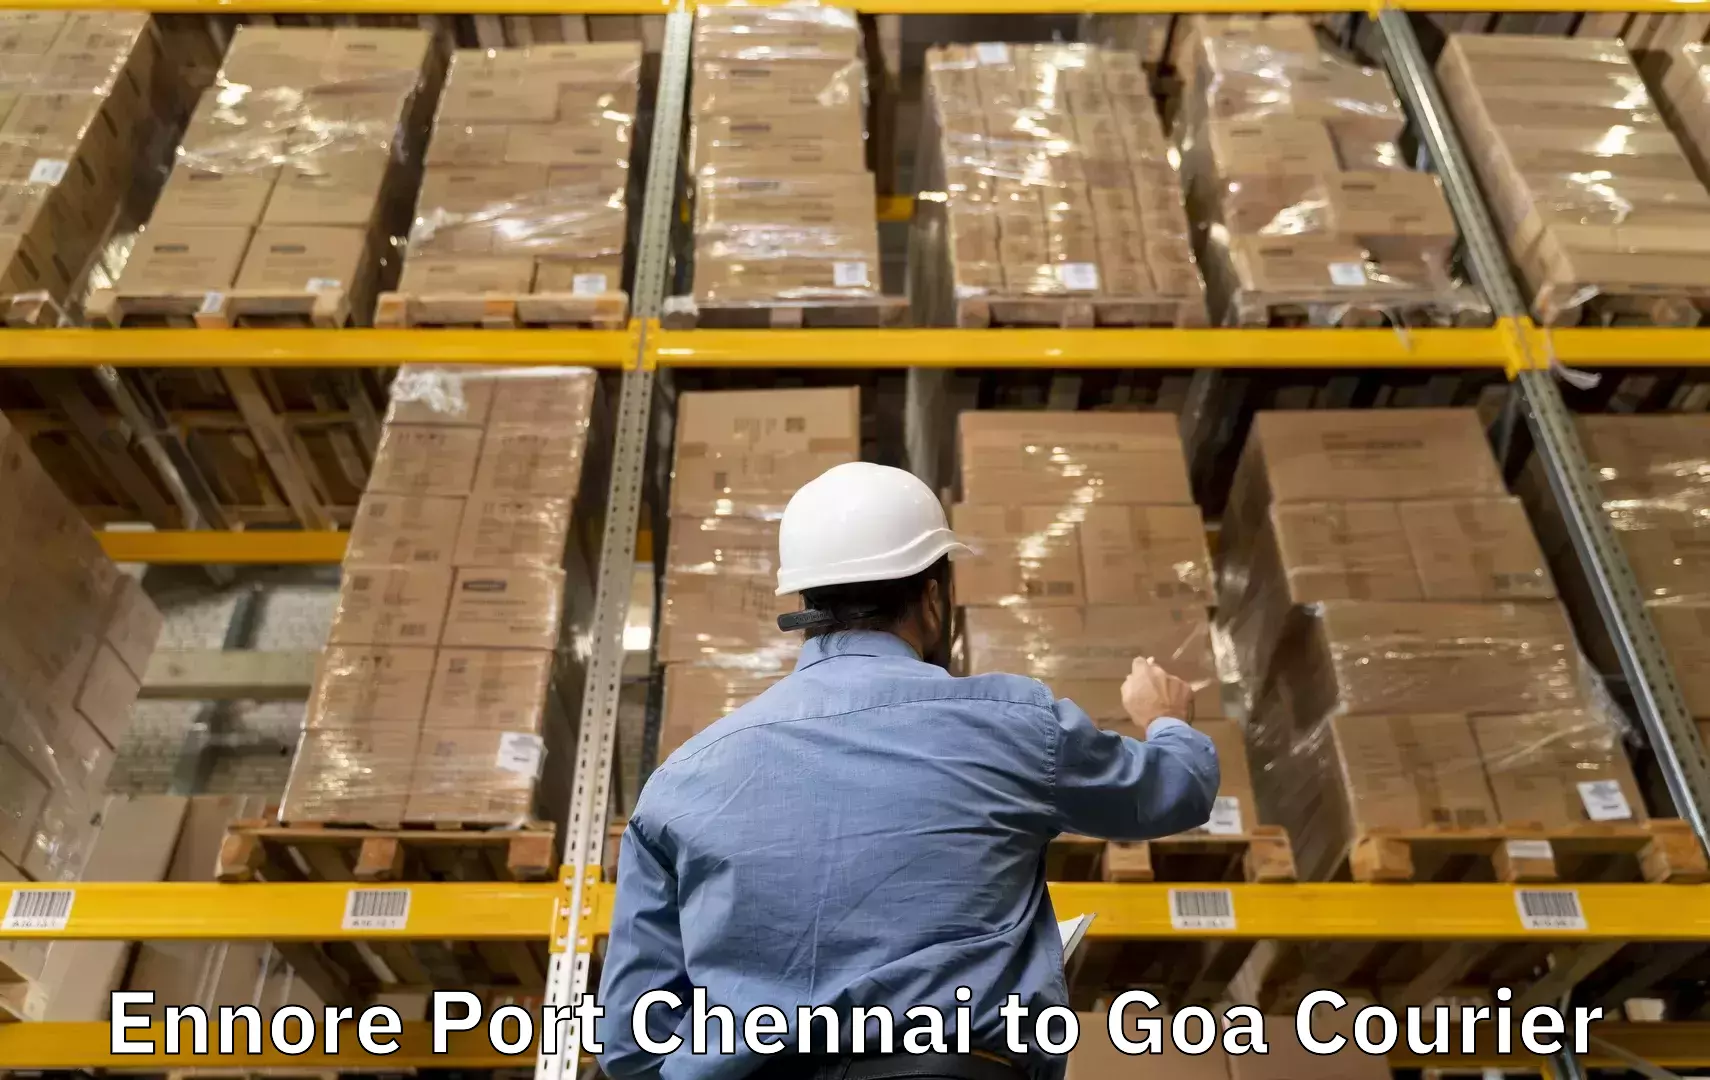 Baggage transport services in Ennore Port Chennai to South Goa